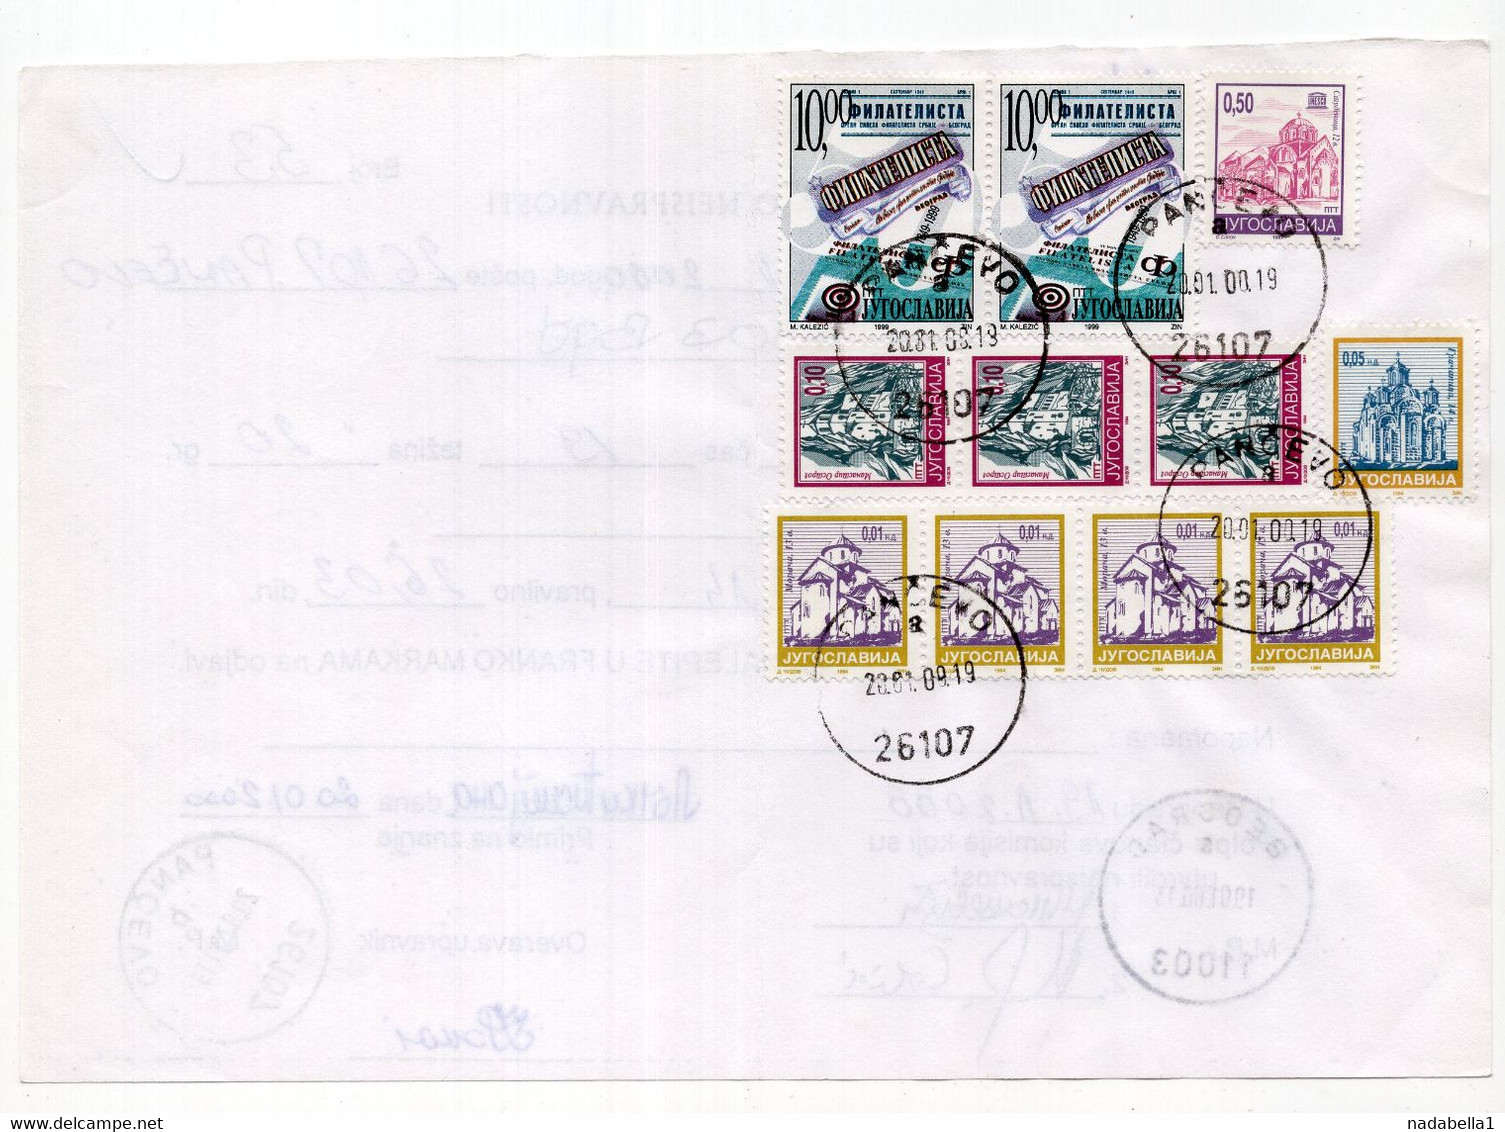 2000. YUGOSLAVIA,SERBIA,PANCEVO,NOTE OF MISSING FRANKING,20.89 DIN FRANKING AT THE BACK - Covers & Documents